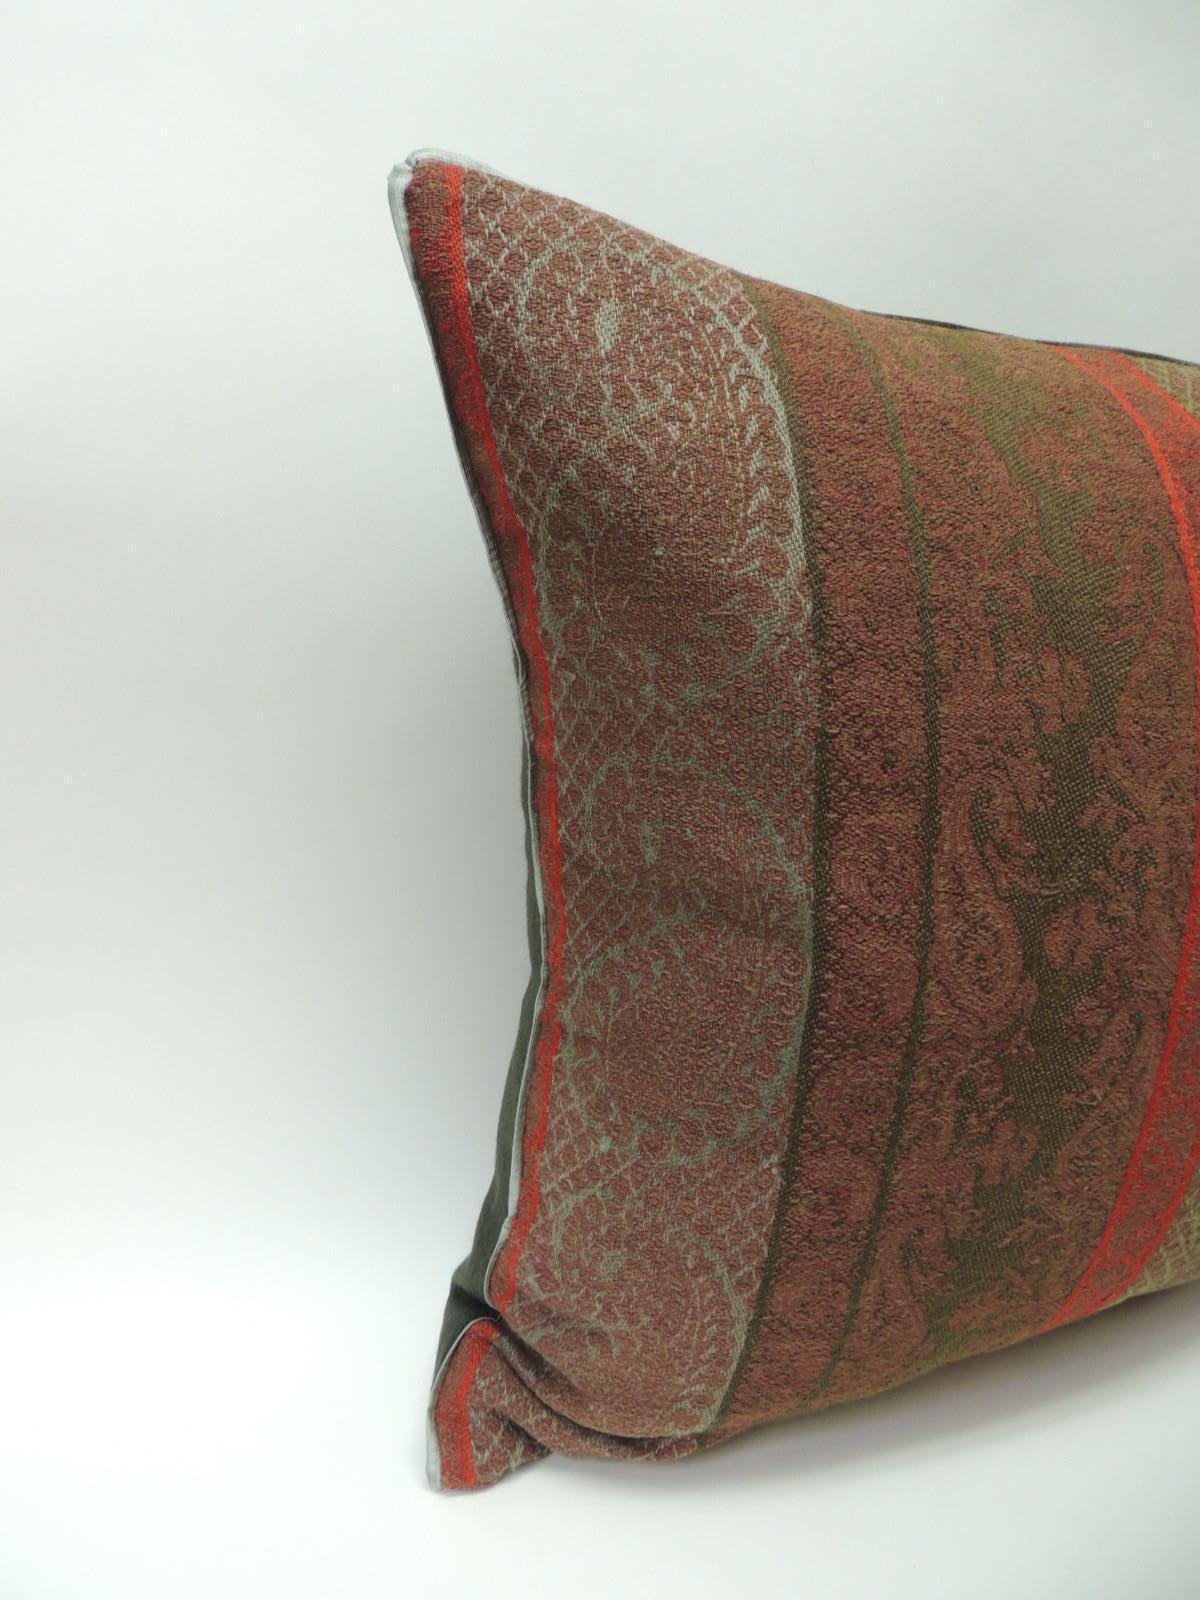 Pair of 19th century antique woven red and green Kashmir decorative pillows with green flat green silk trim and hunter green carriage cloth fabric backing.
In shades of brown, green, red and soft green. Handcrafted decorative pillow made with an